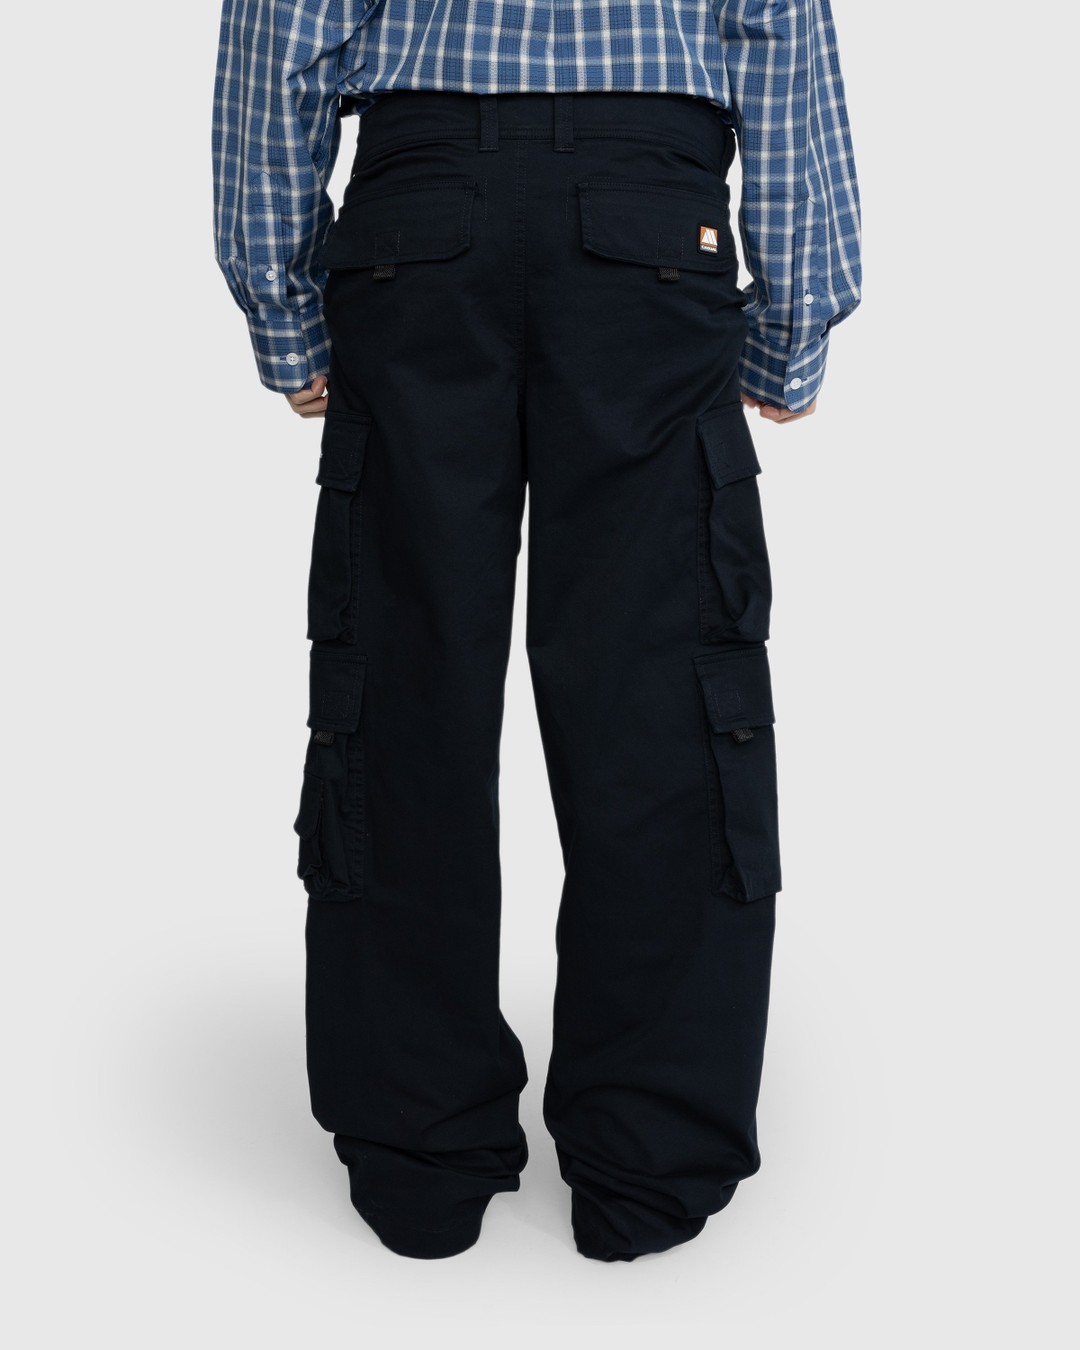 Martine Rose – Pulled Cargo Trouser Navy - Pants - Blue - Image 3